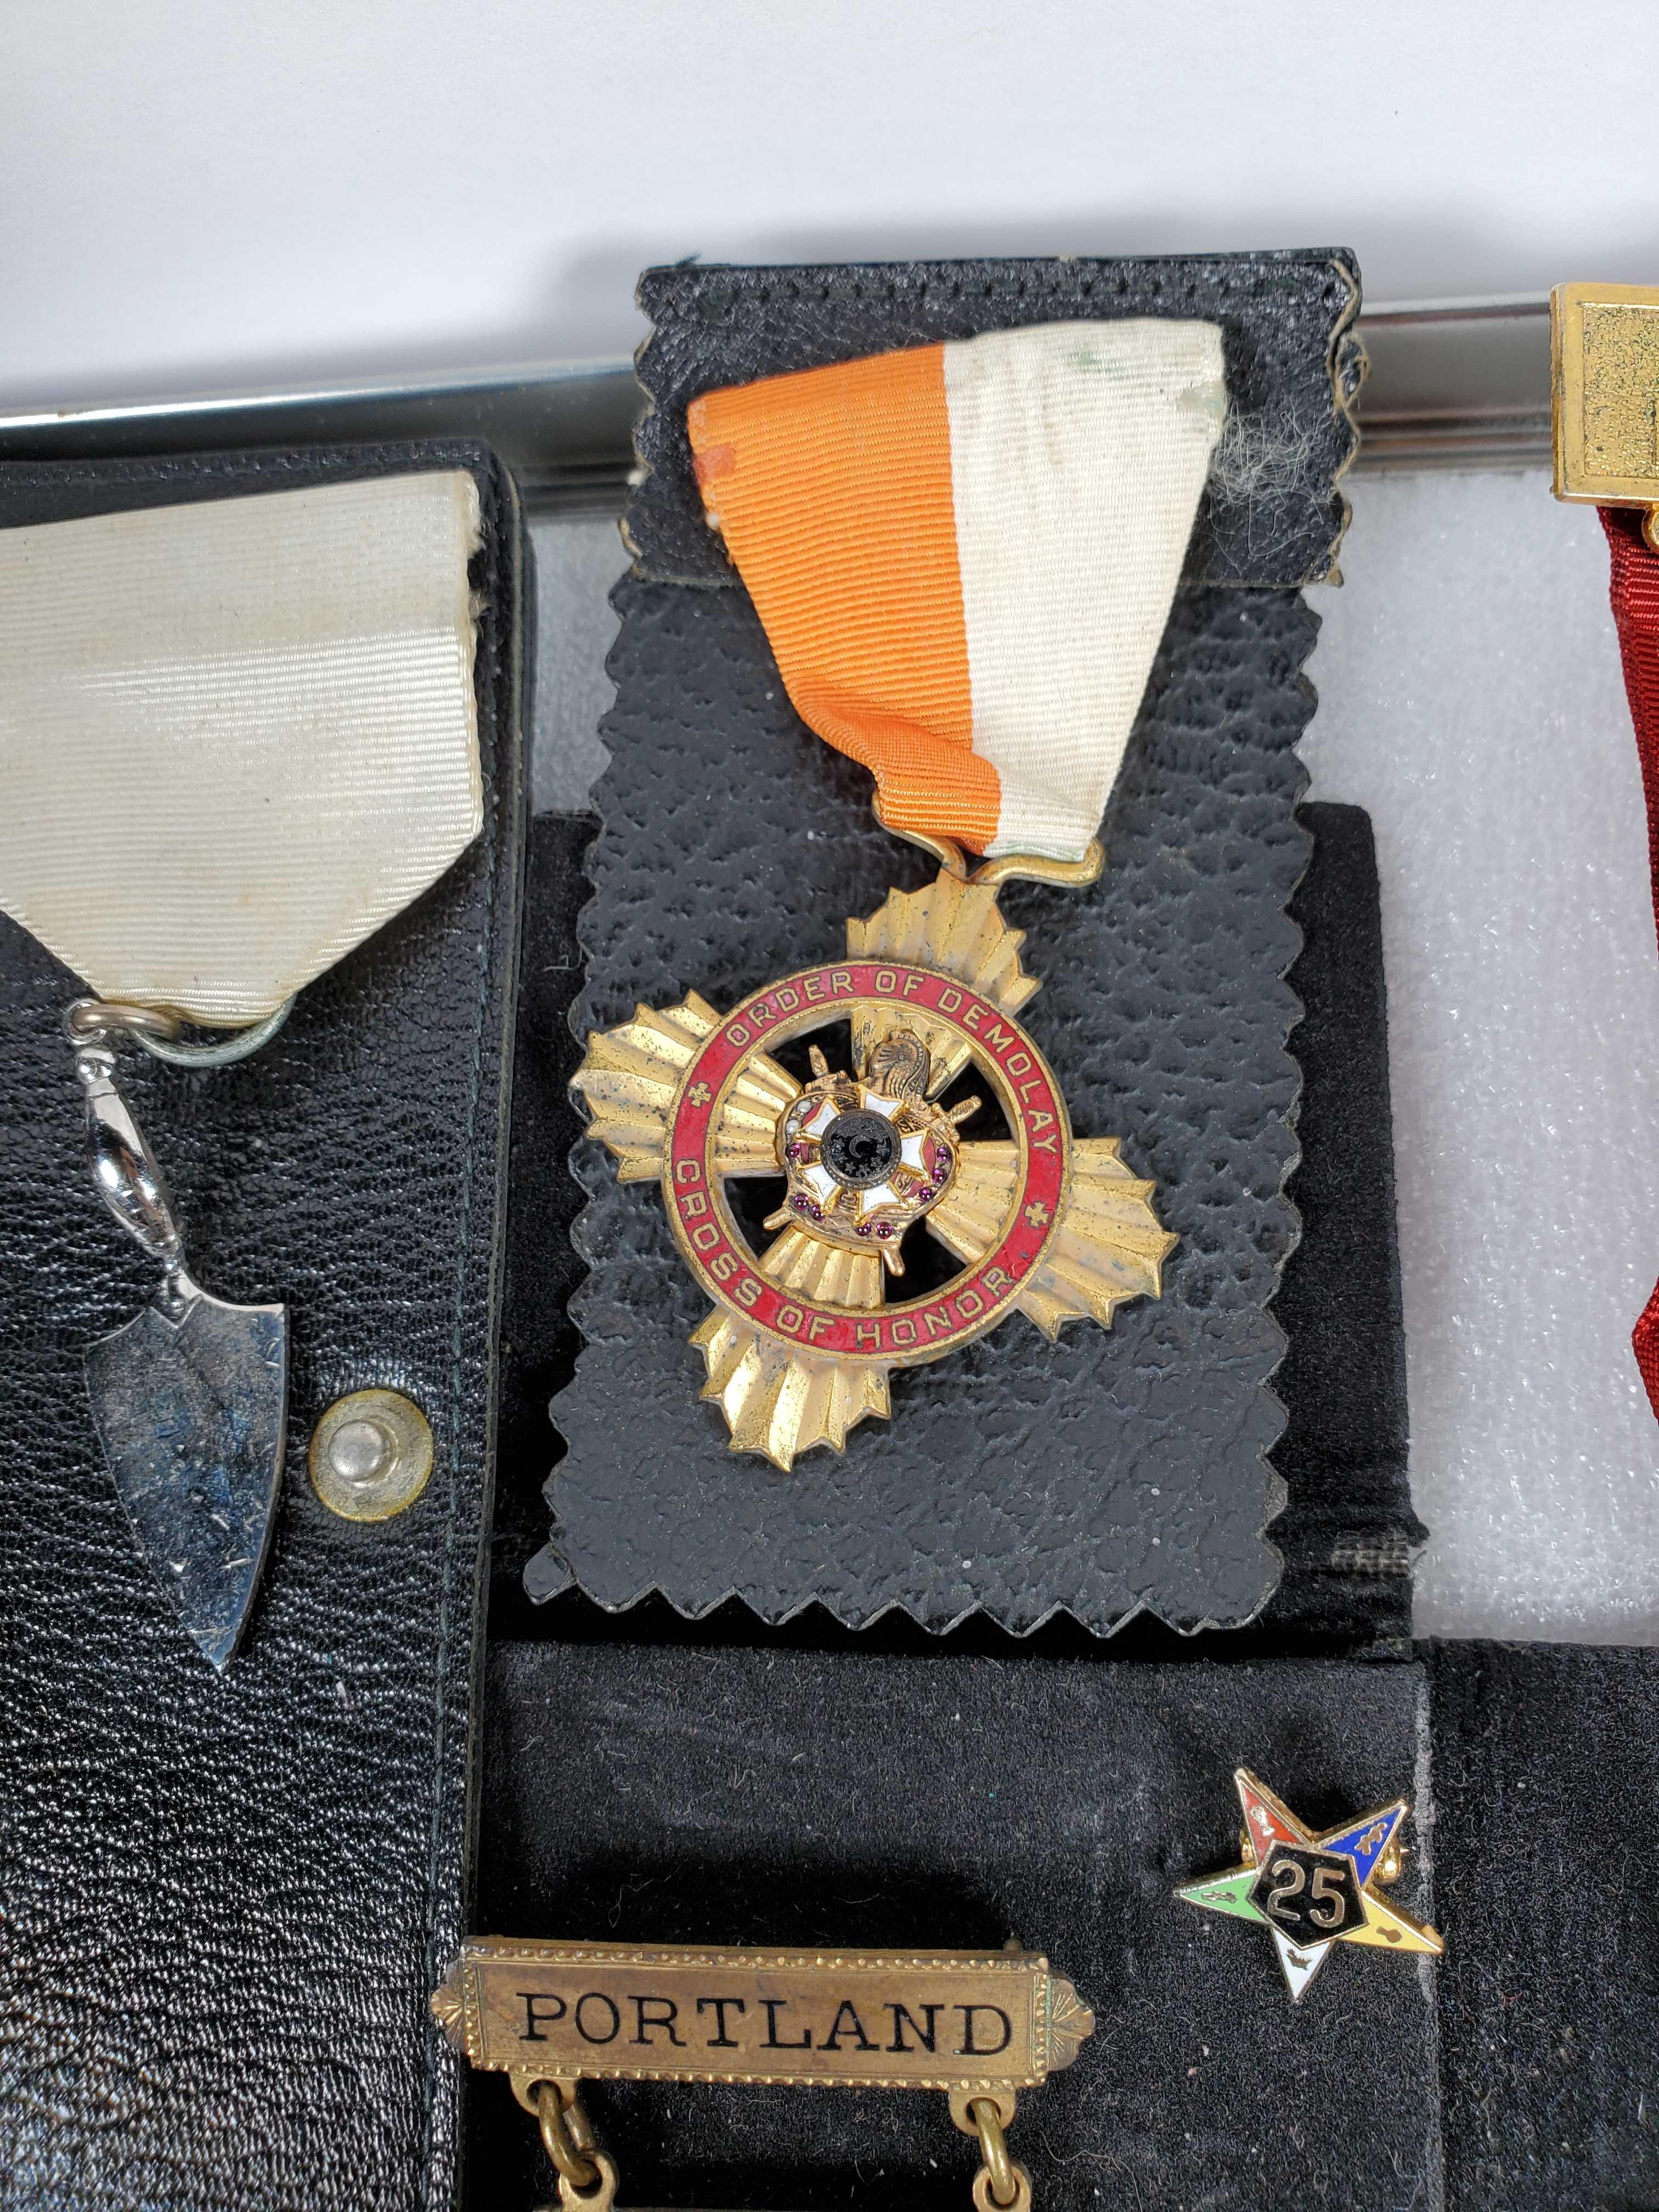 Collection of Vintage Masonic & Other Fraternal Medals